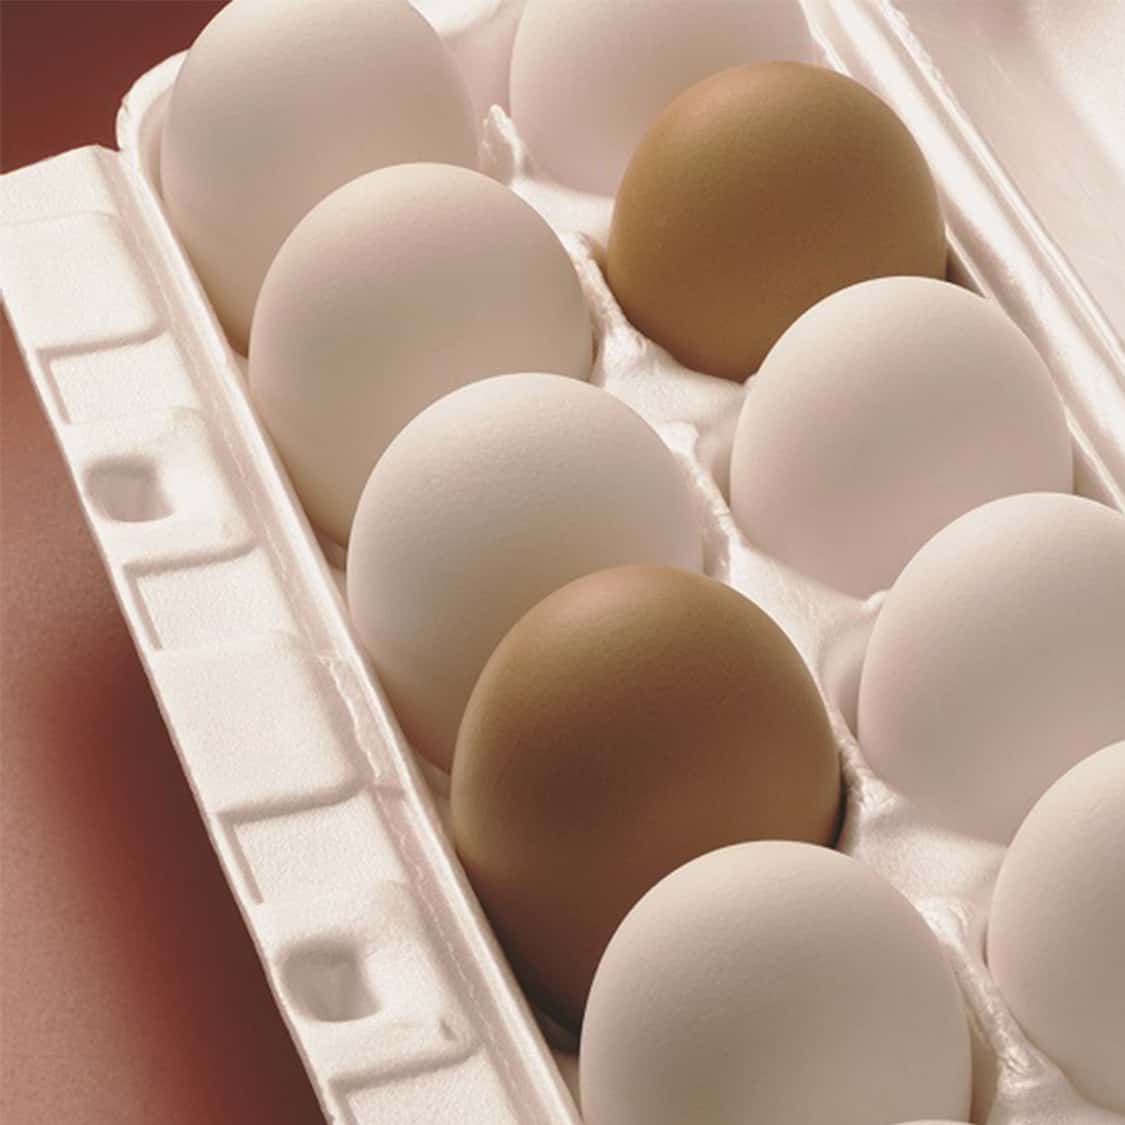 a carton of brown and white eggs